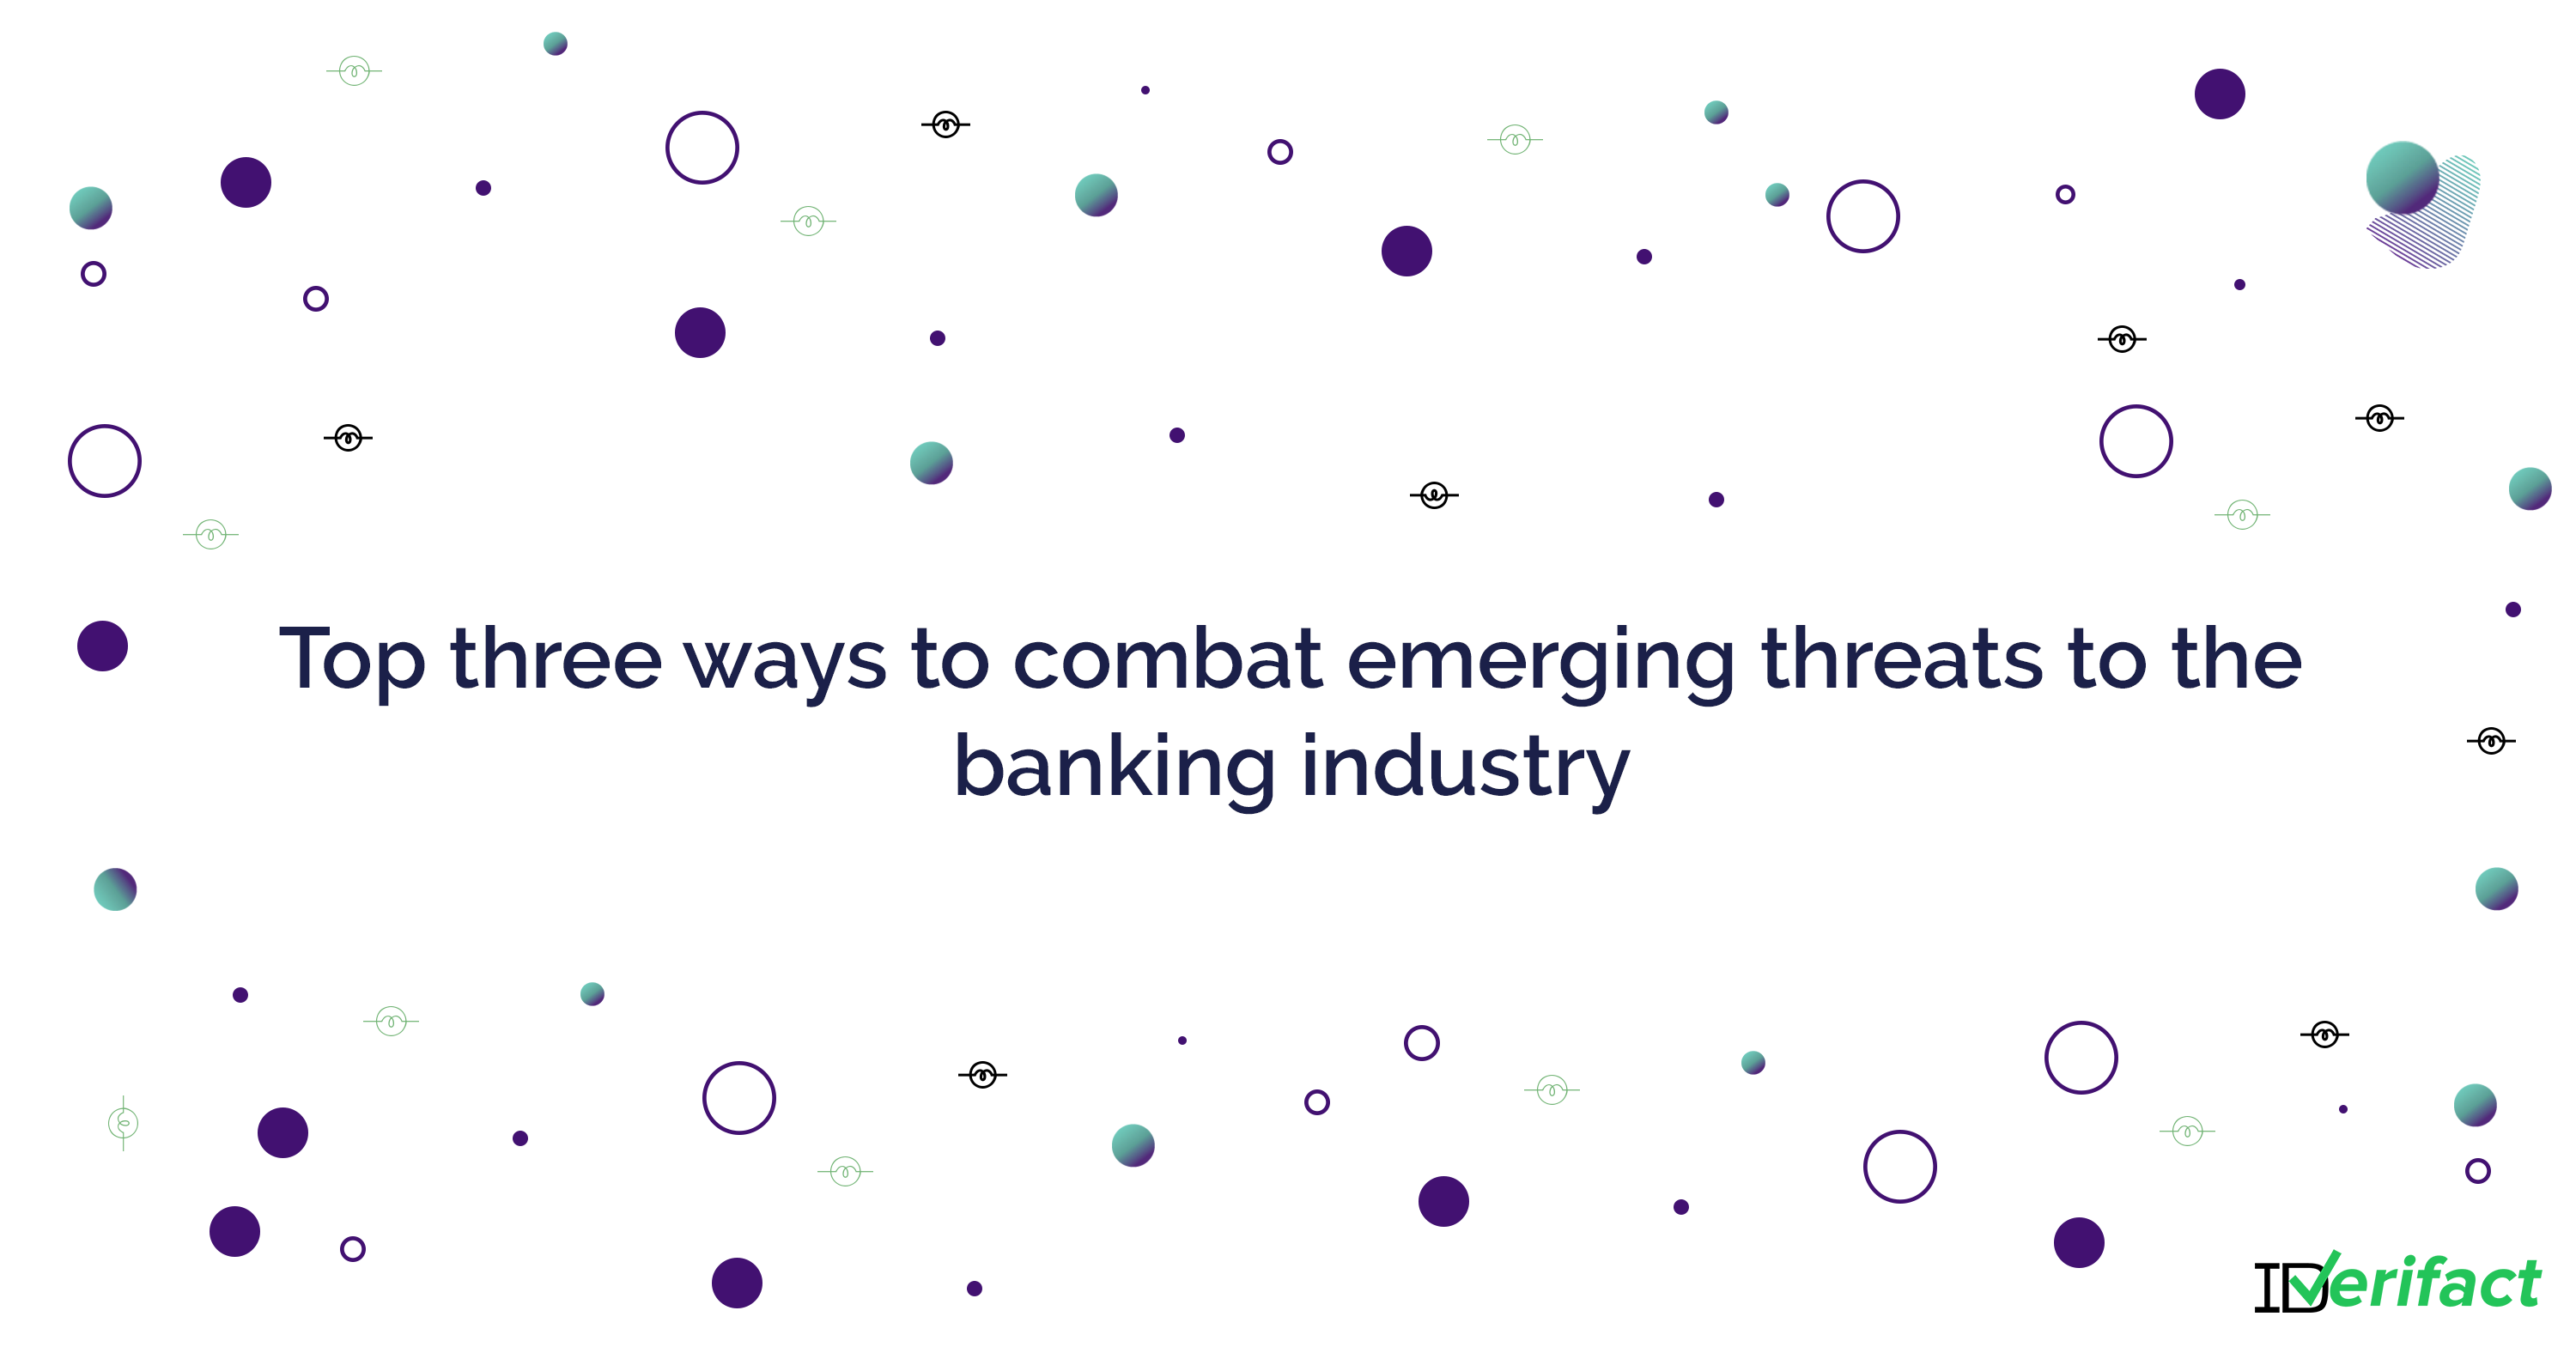 Top three ways to combat emerging threats to the banking industry